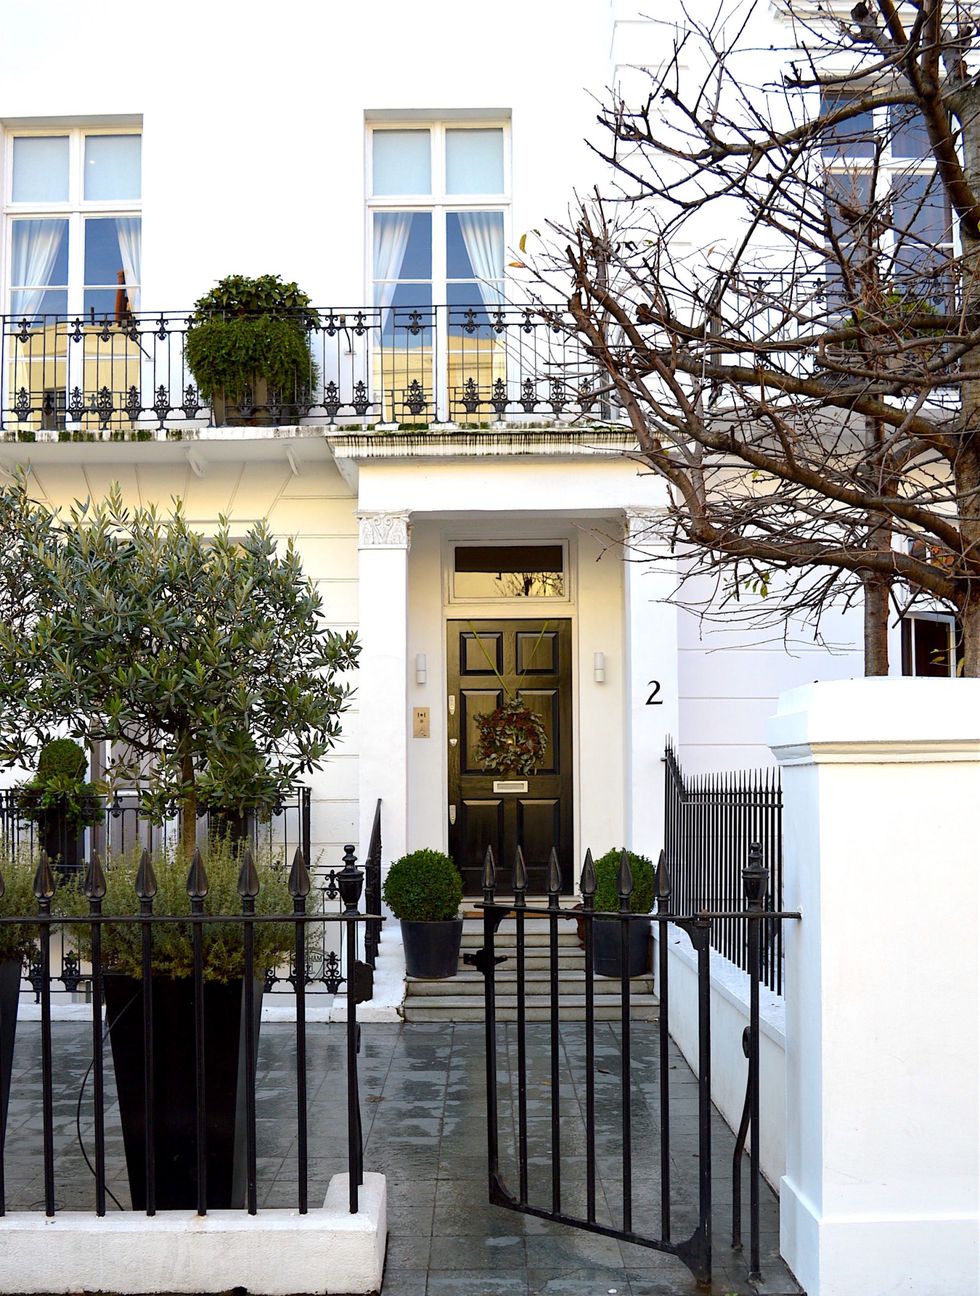 <p>Knightsbridge is also home to the quaintest (and most expensive) houses in London. Don't be surprised if an Italian sports car goes flying past you when you're strolling along its streets.</p>